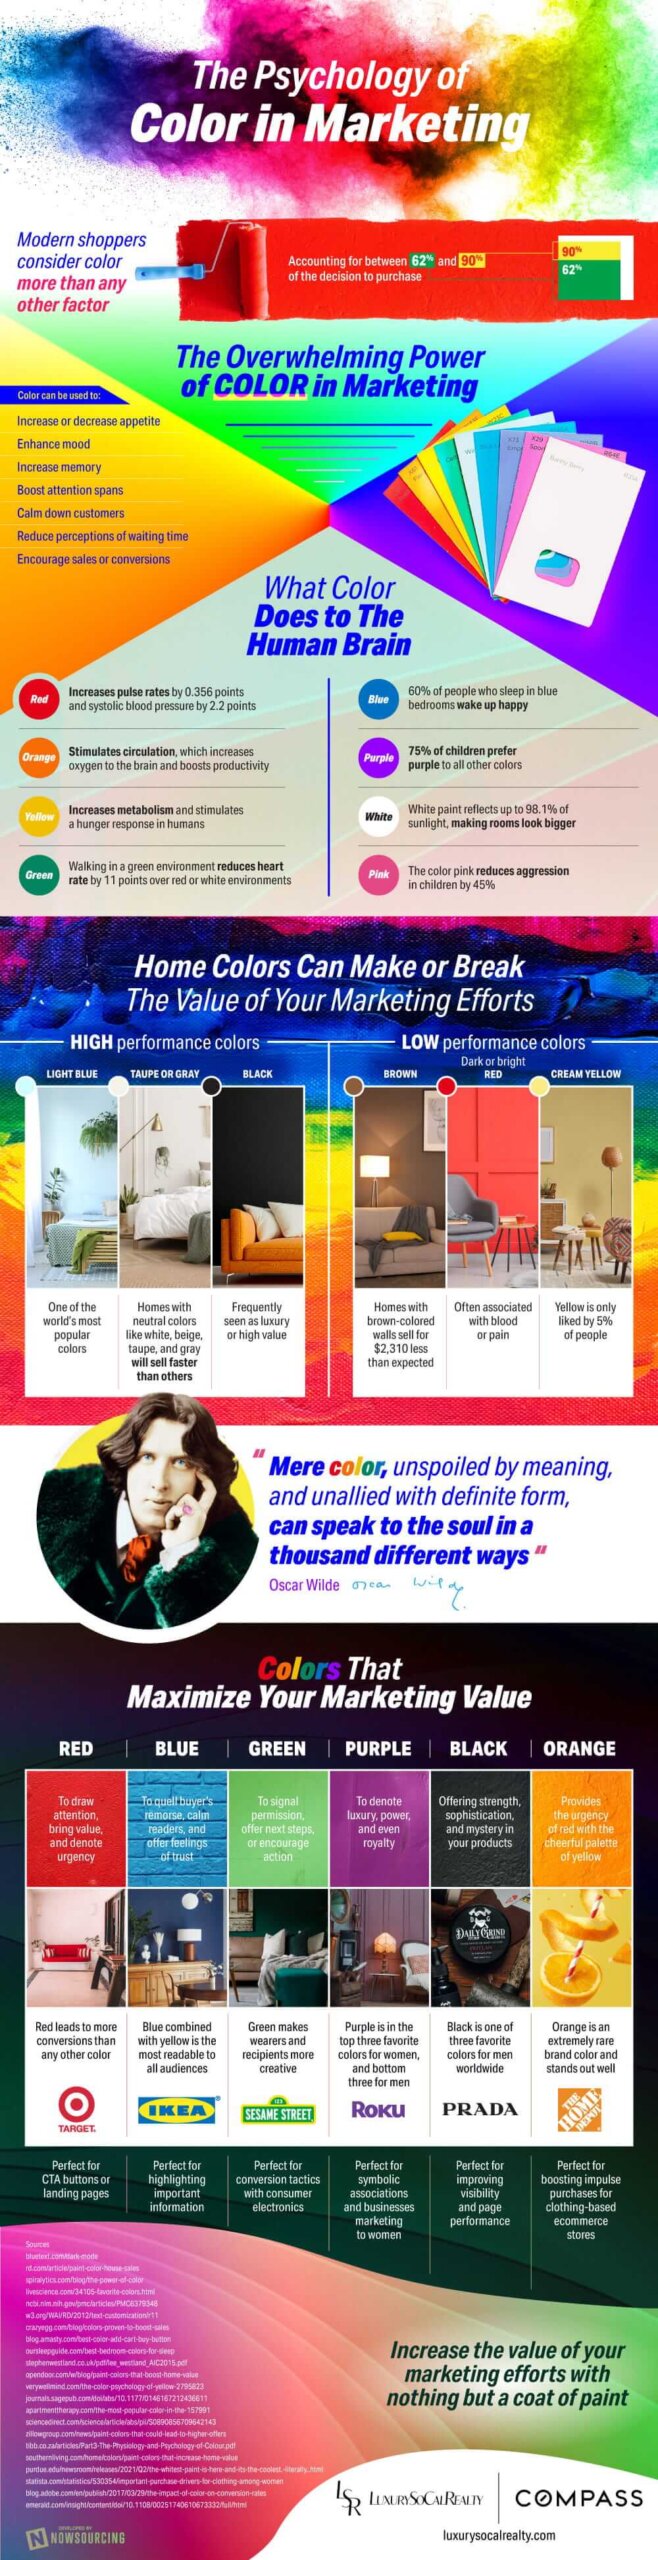 psychology-of-color-in-marketing